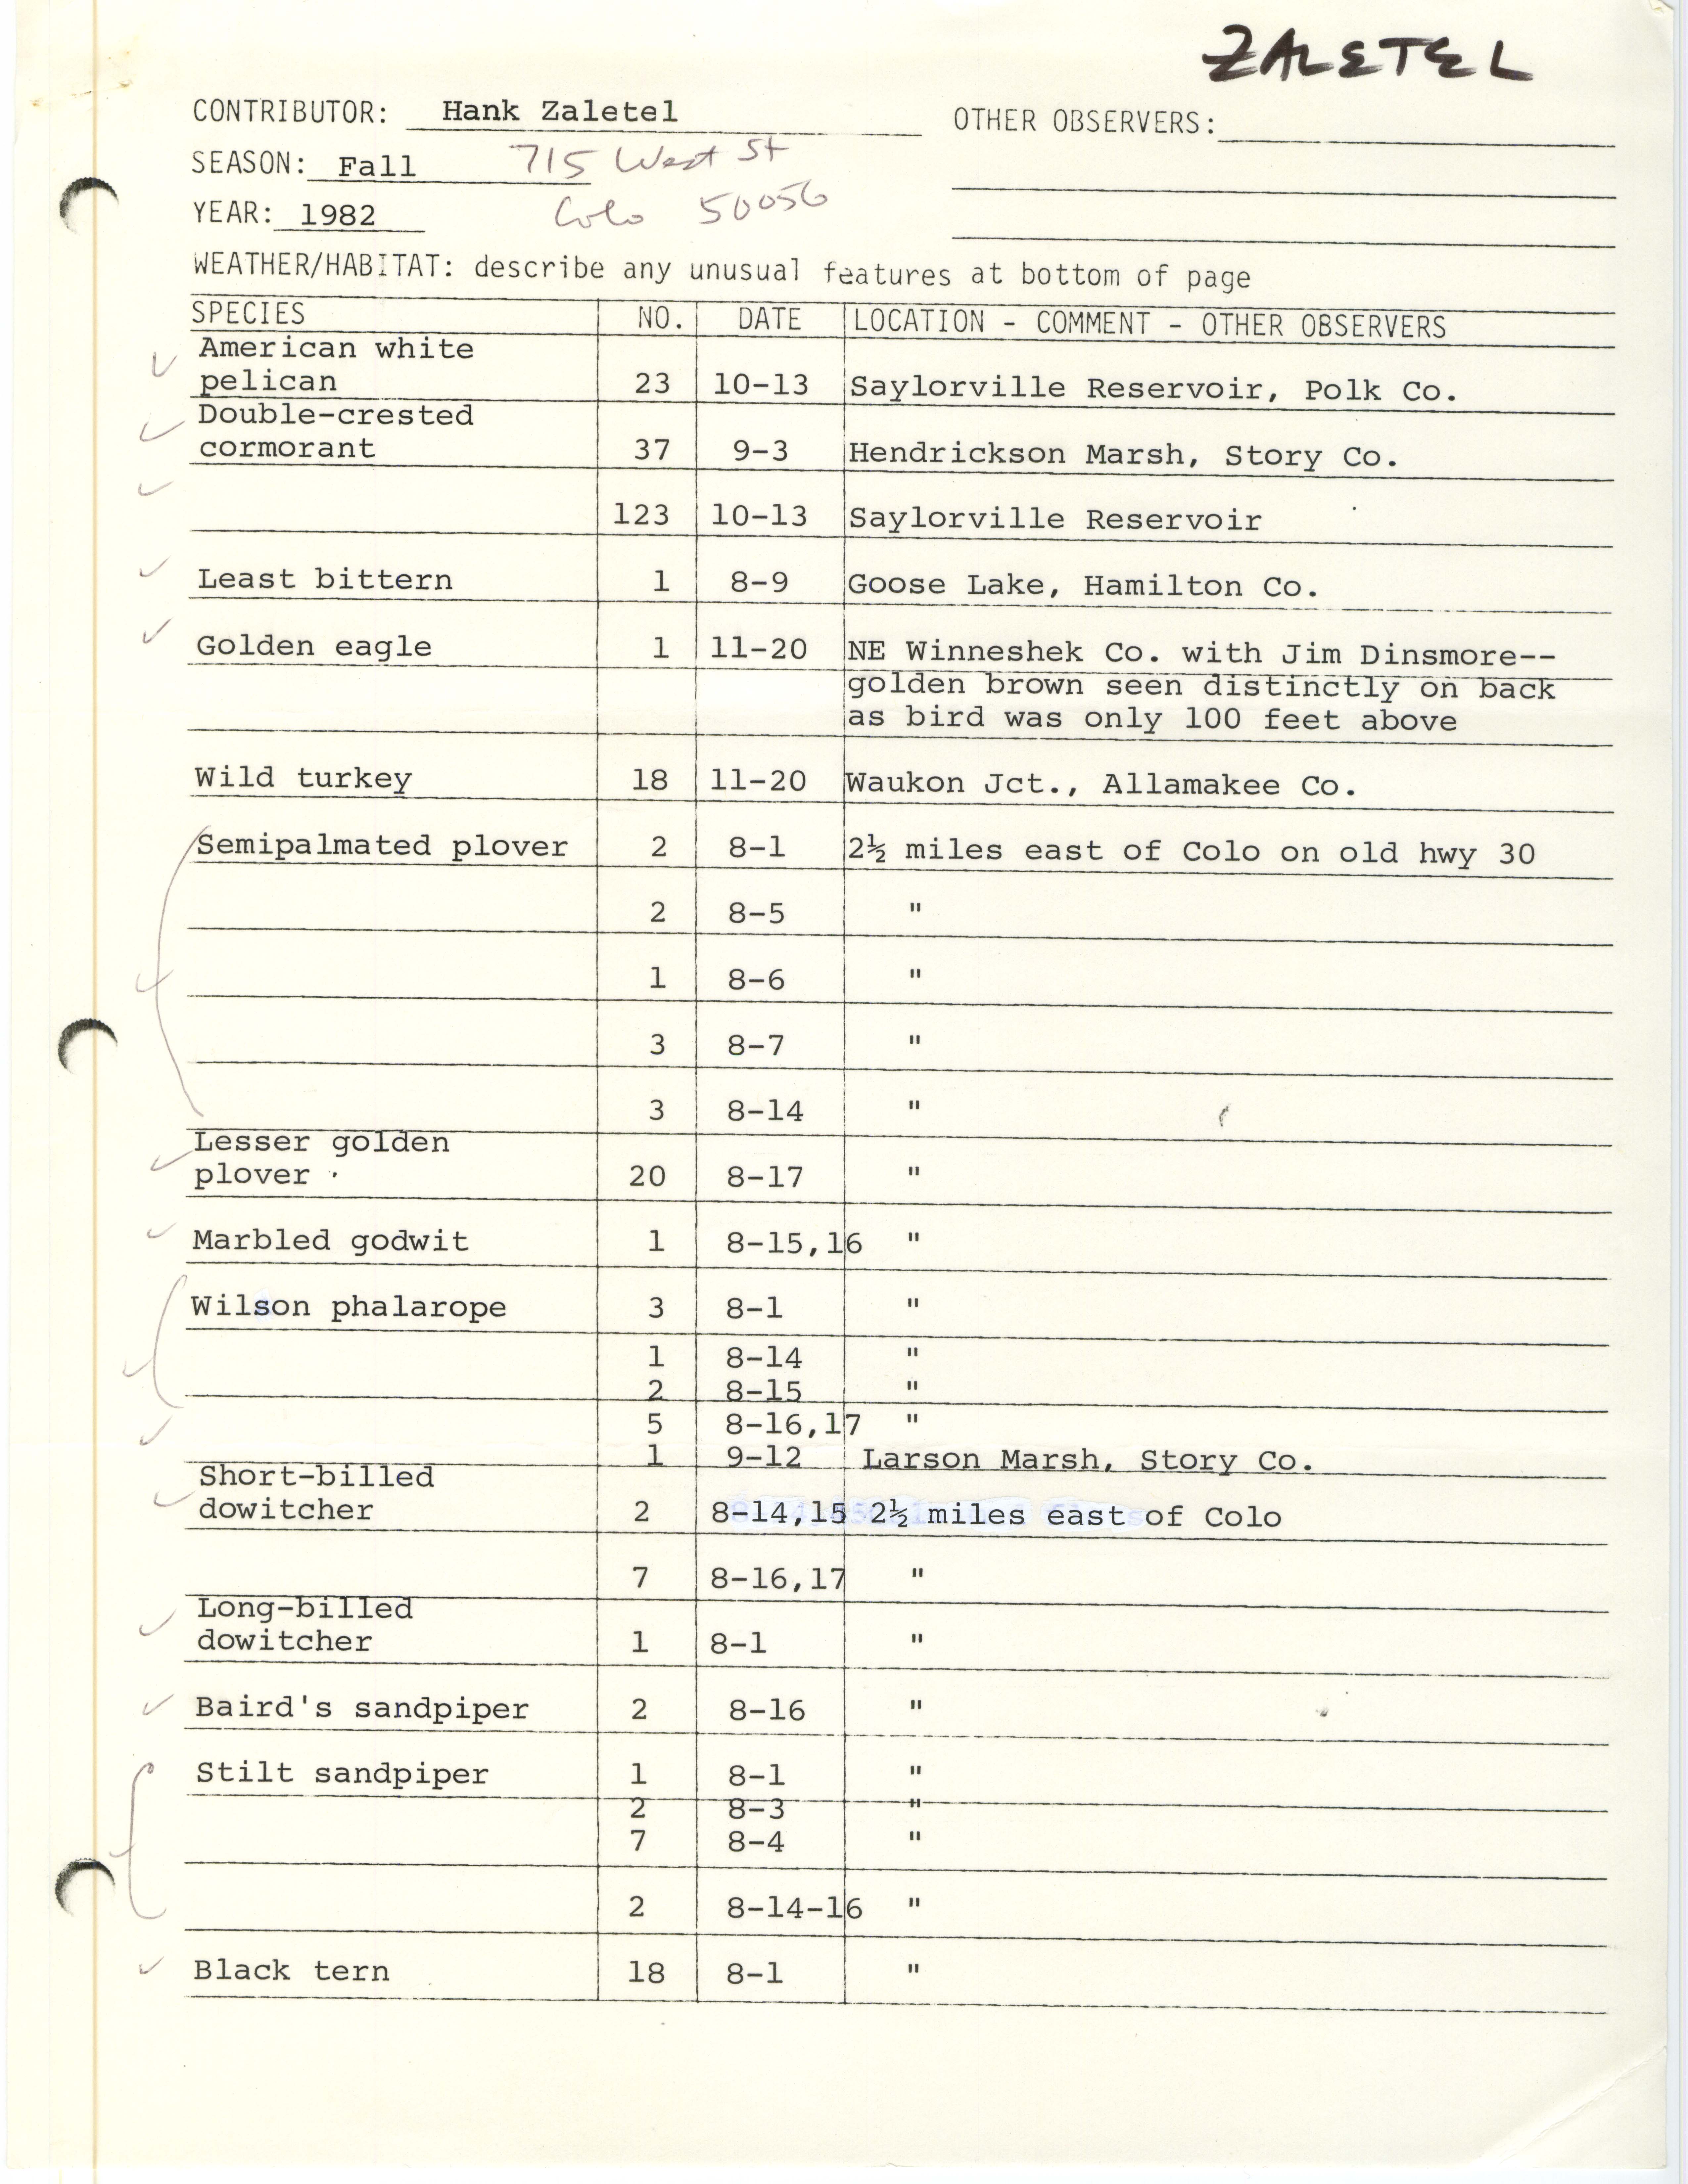 Field notes contributed by Hank Zaletel, fall 1982